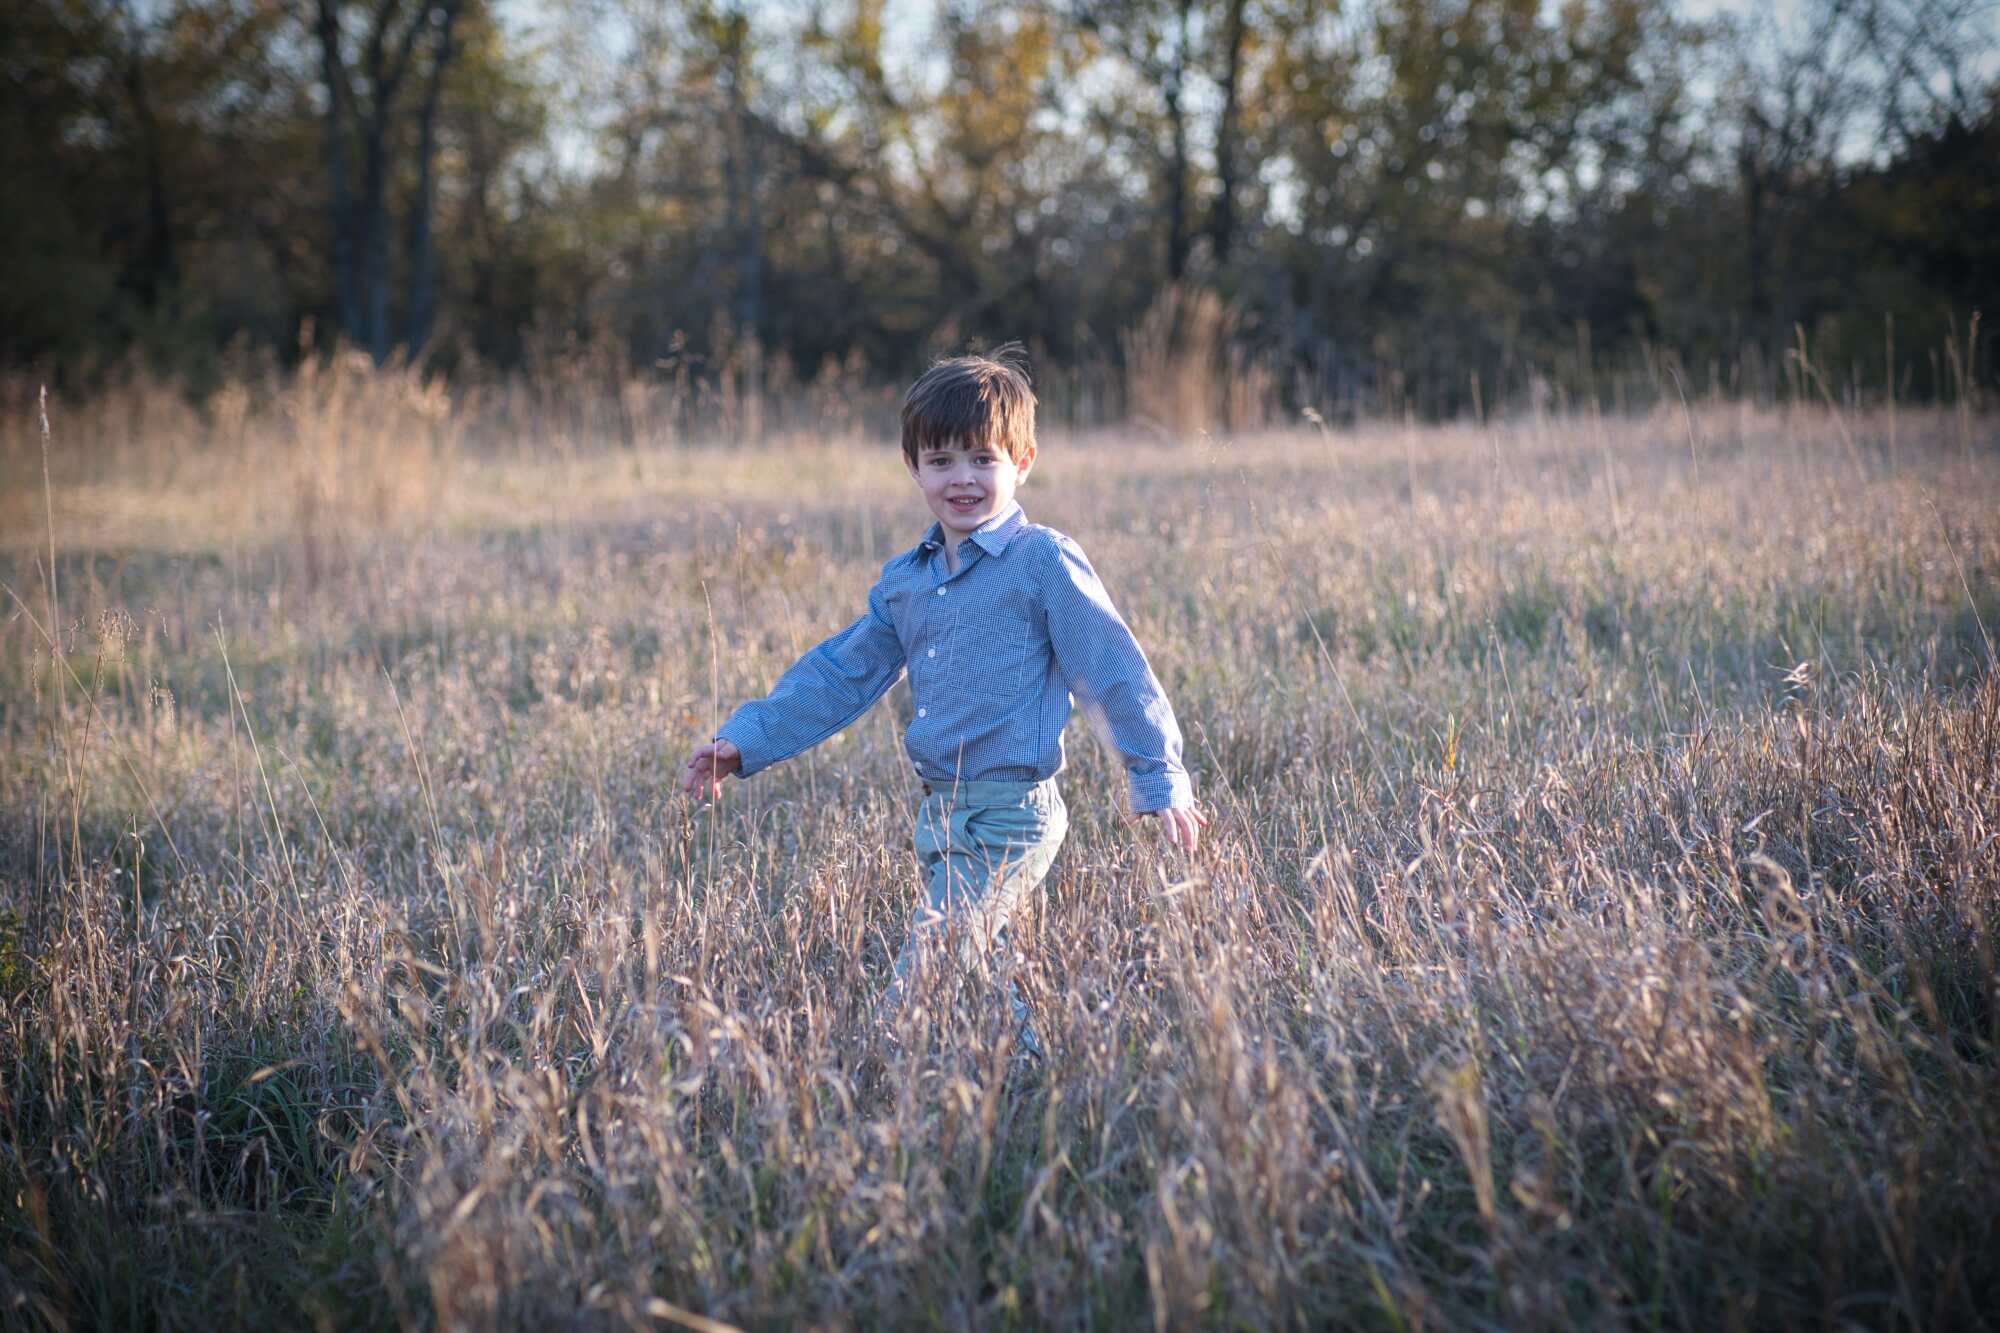 Boy in a field with vignette added.